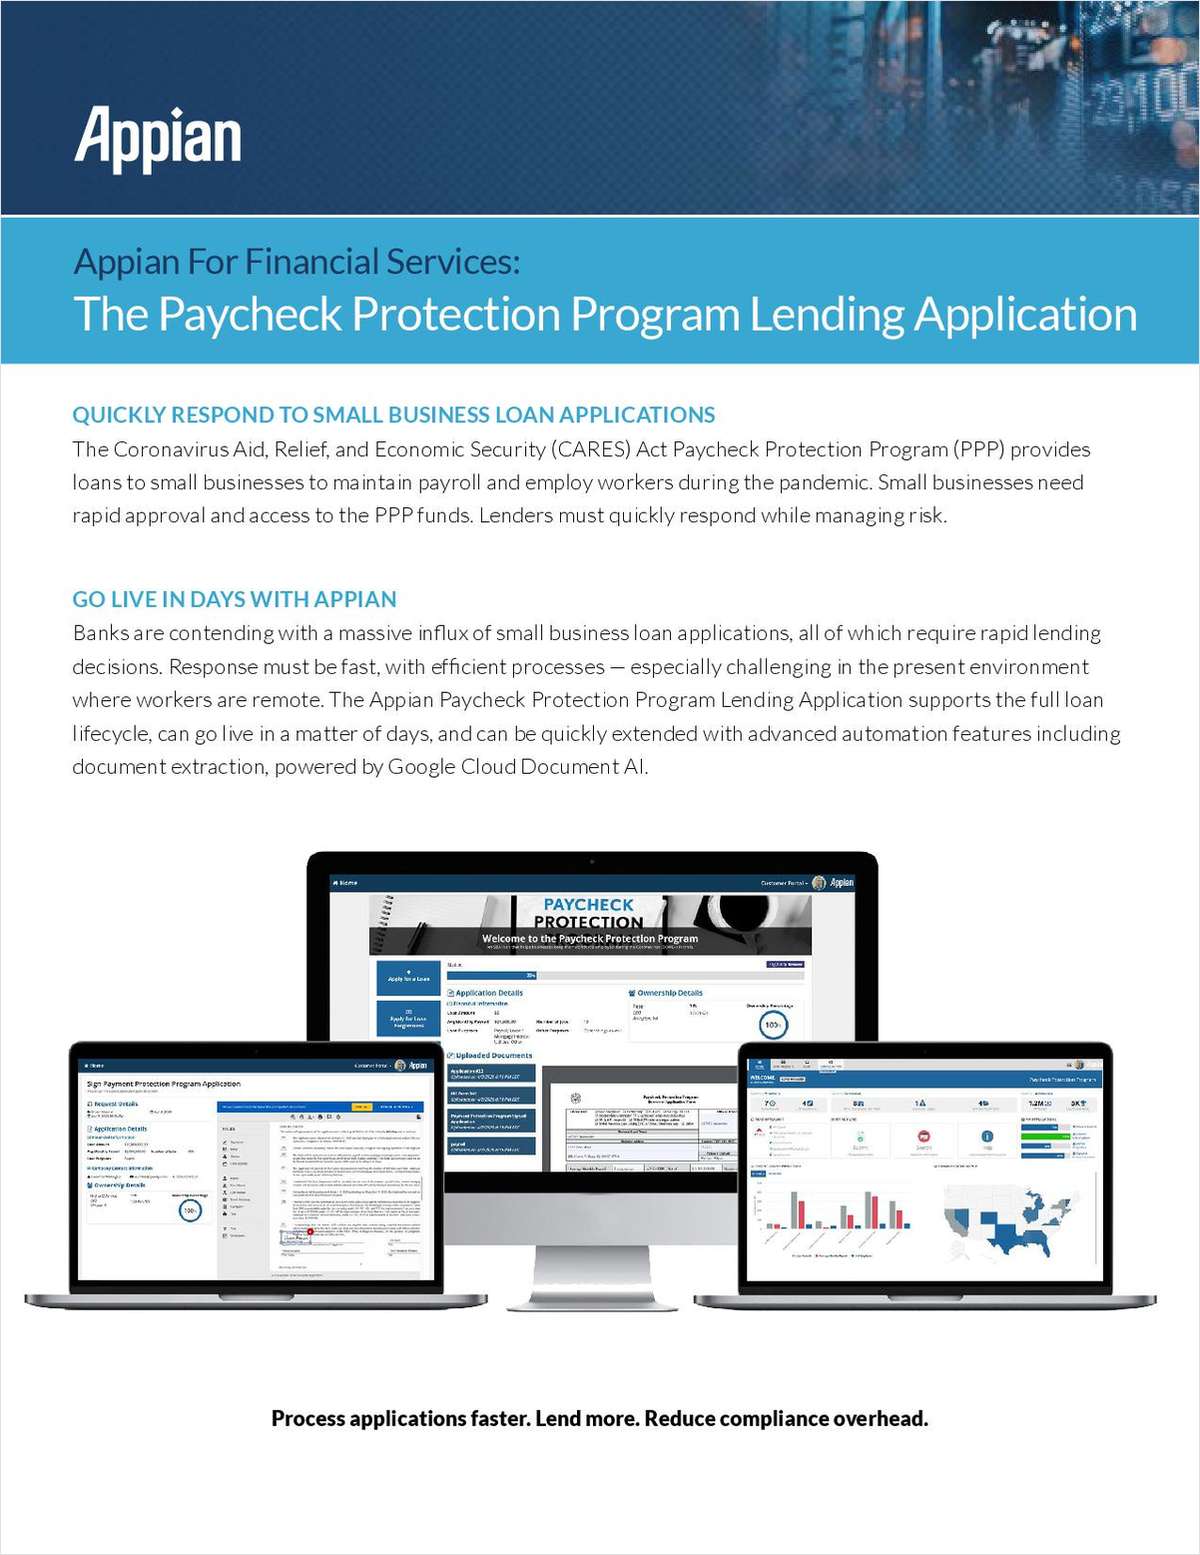 Appian For Financial Services: The Paycheck Protection Program Lending Application